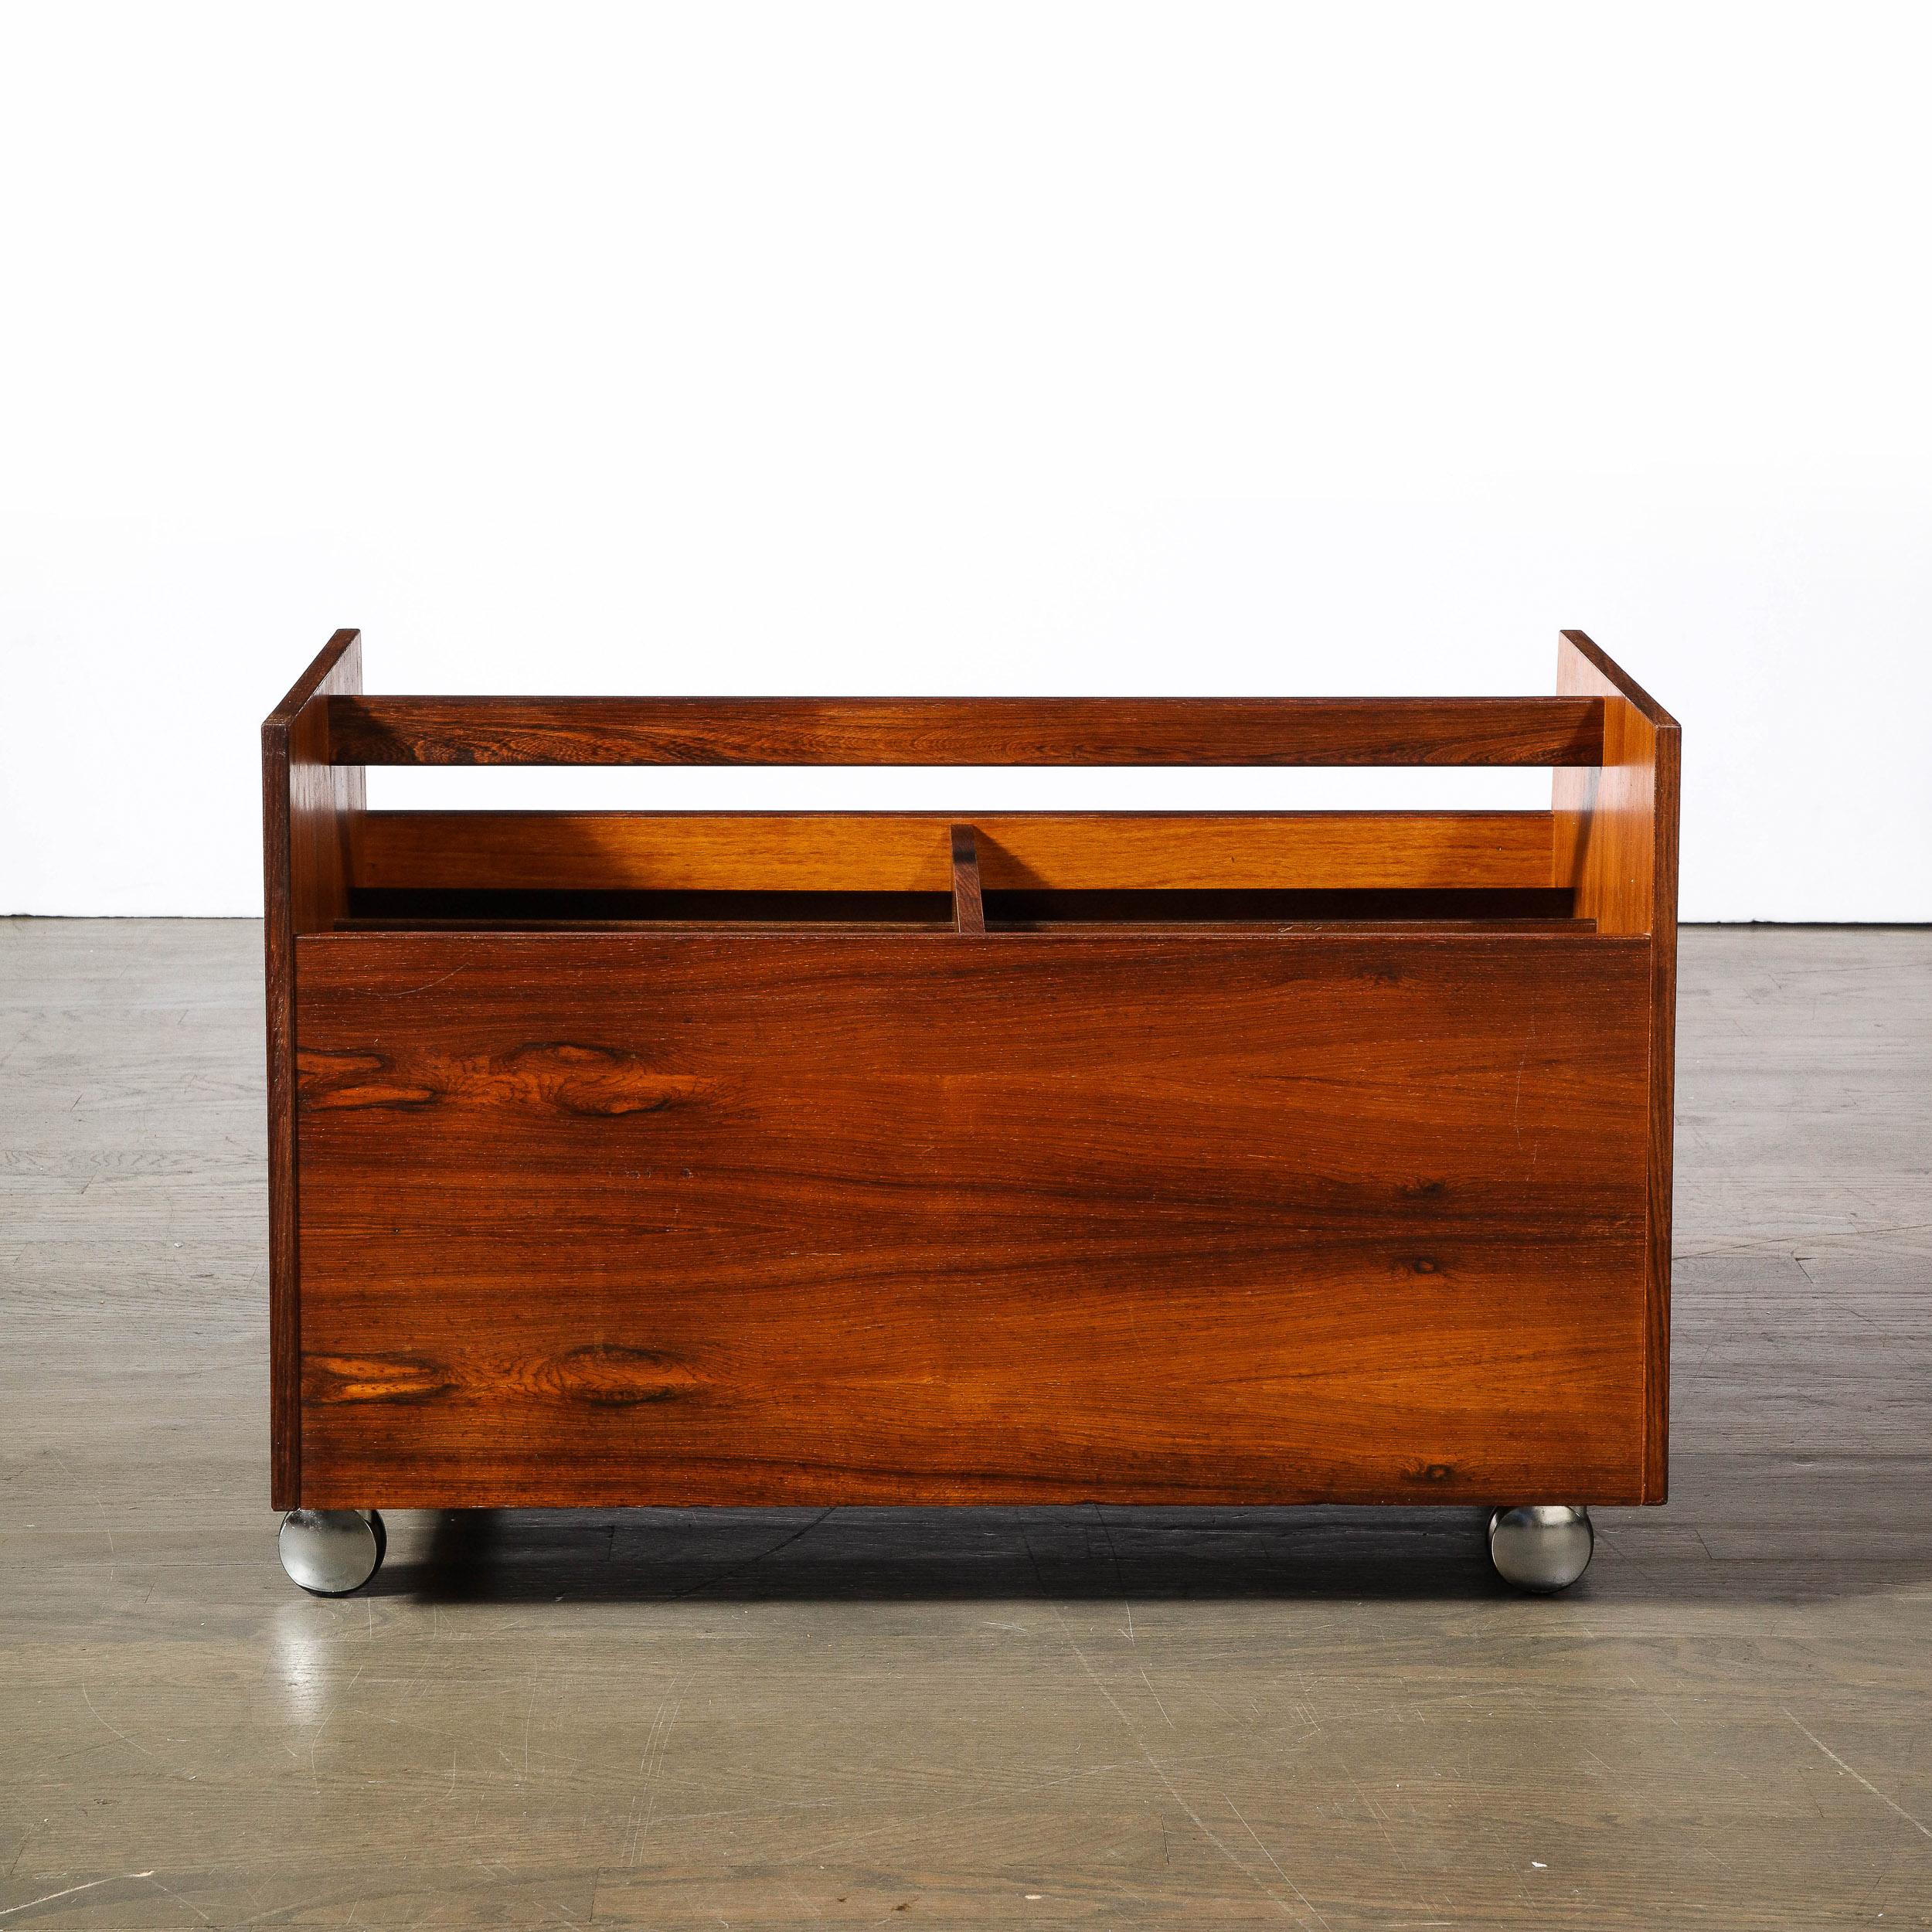 This breathtaking Mid-Century Modernist Magazine Rack in Book-matched Rosewood is designed by the esteemed artist Rolf Hesland for Bruksbo, originating from Norway, Circa 1960. Hesland trained as a furniture maker in Norway and later studied at the